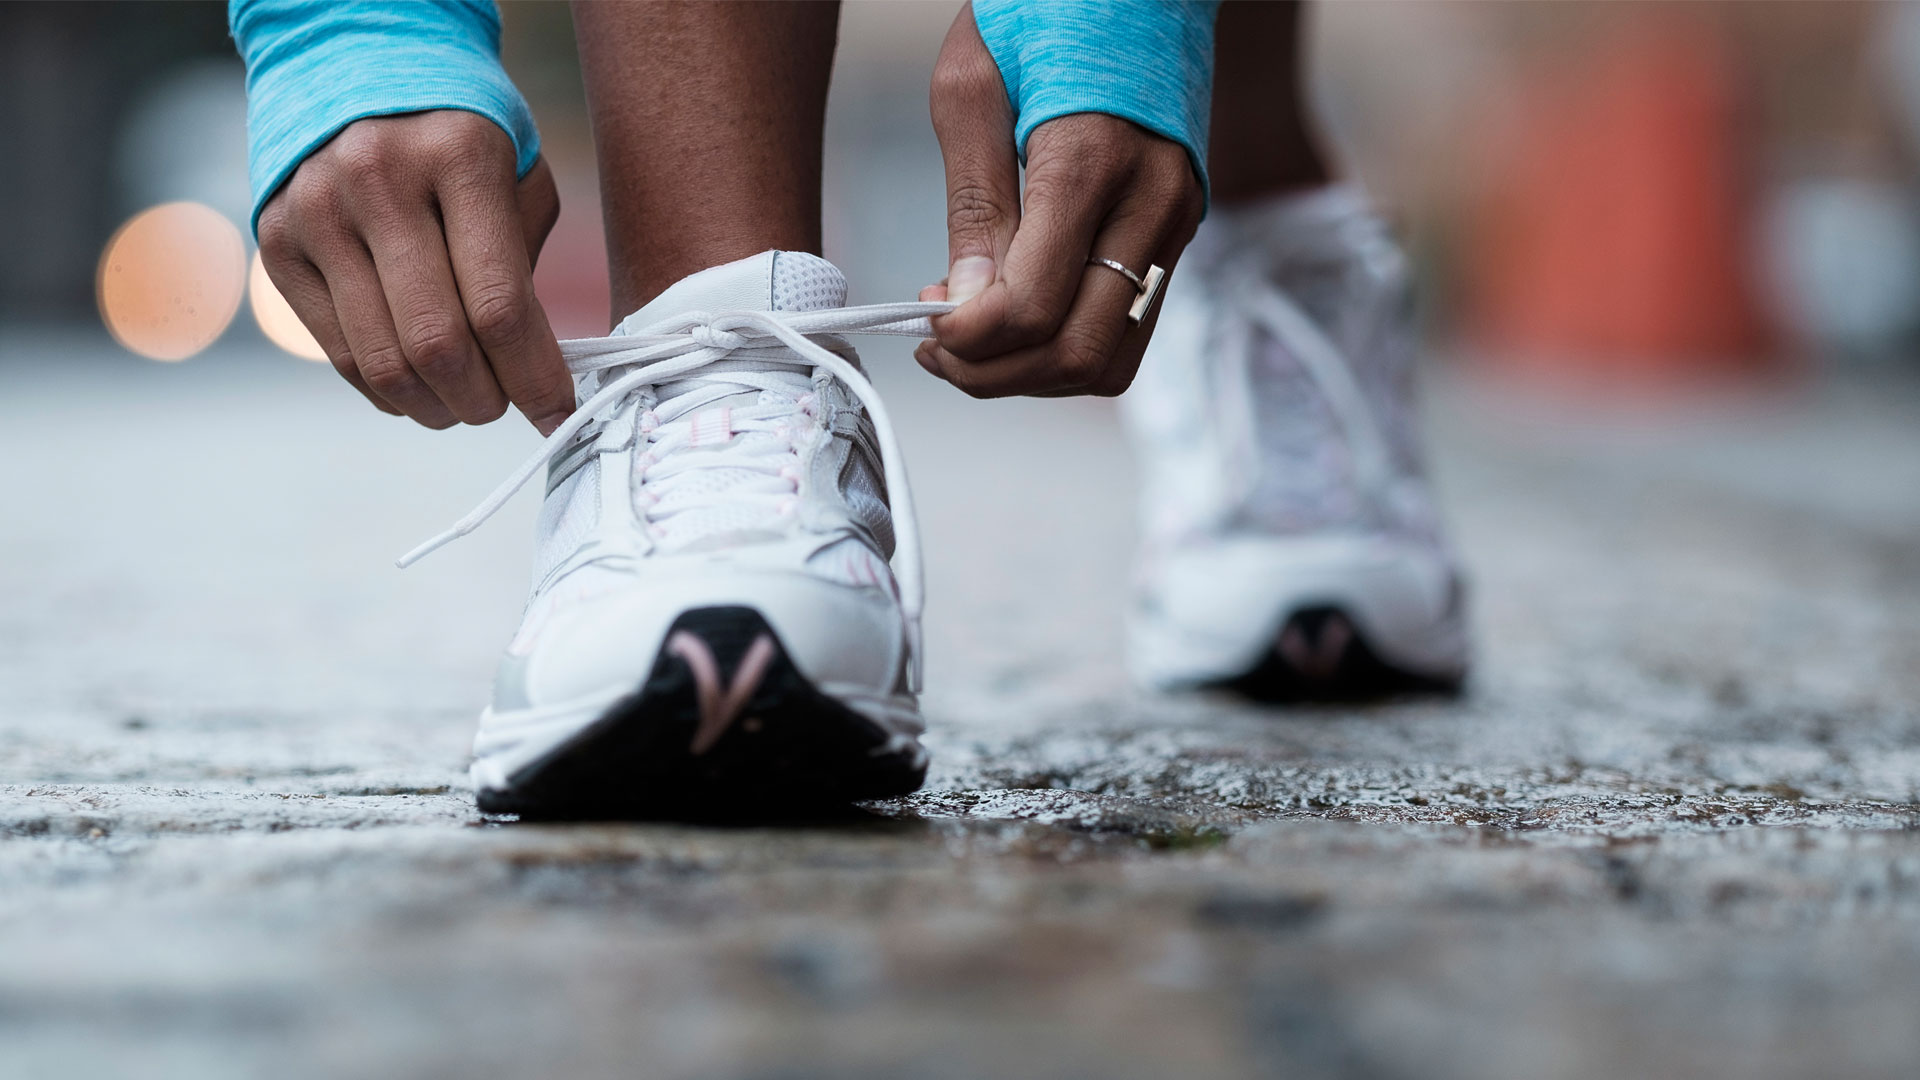 How to run properly: Image shows person tying trainer laces.